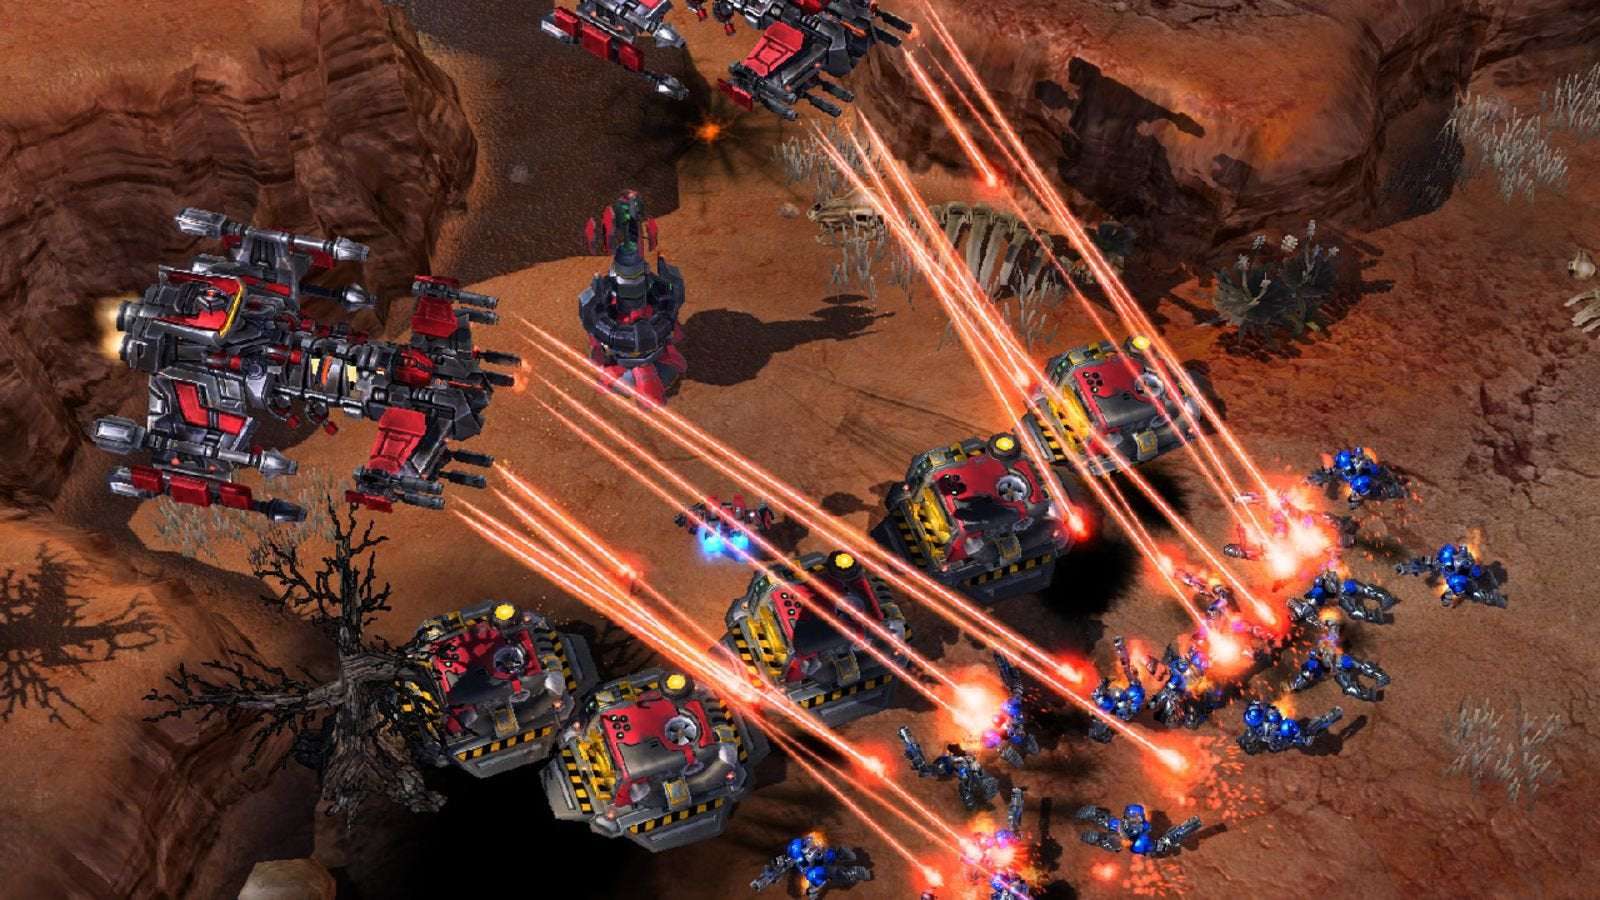 image for Sources: Blizzard Cancels StarCraft First-Person Shooter To Focus On Diablo 4 And Overwatch 2